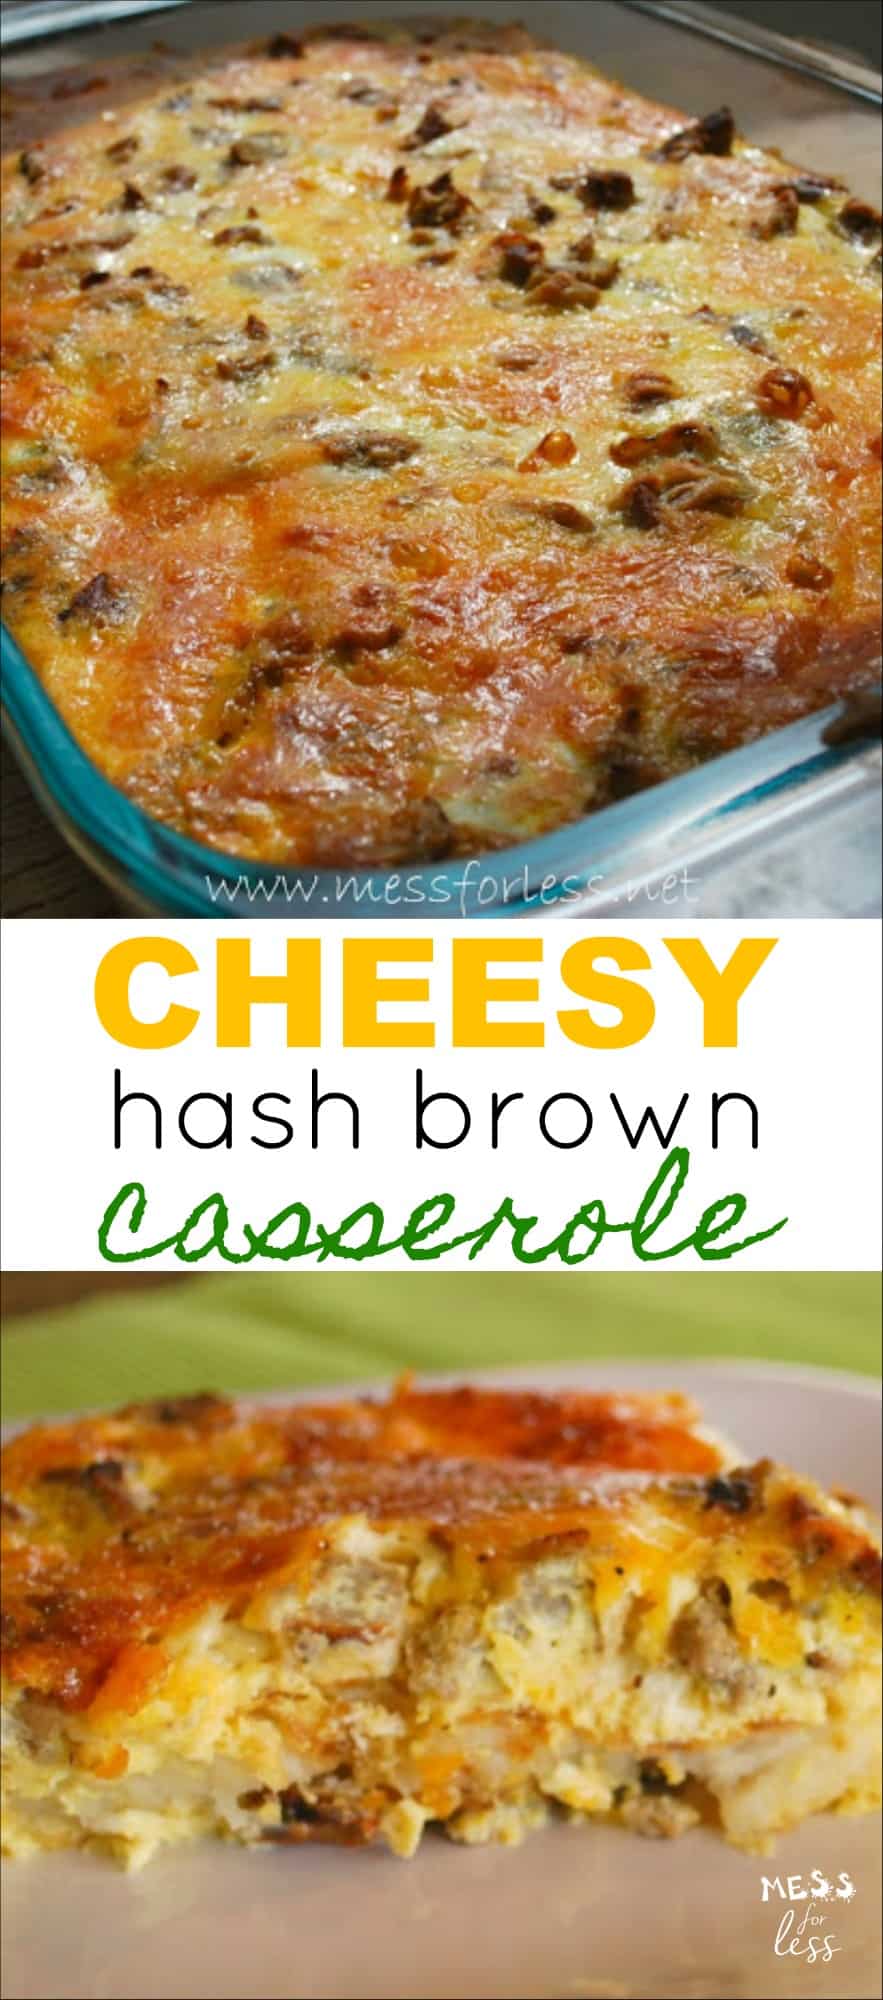 Cheesy Hash Brown Casserole - a delicious breakfast casserole that can be made the night before or in the morning. Hearty, filling and cheesy breakfast idea!